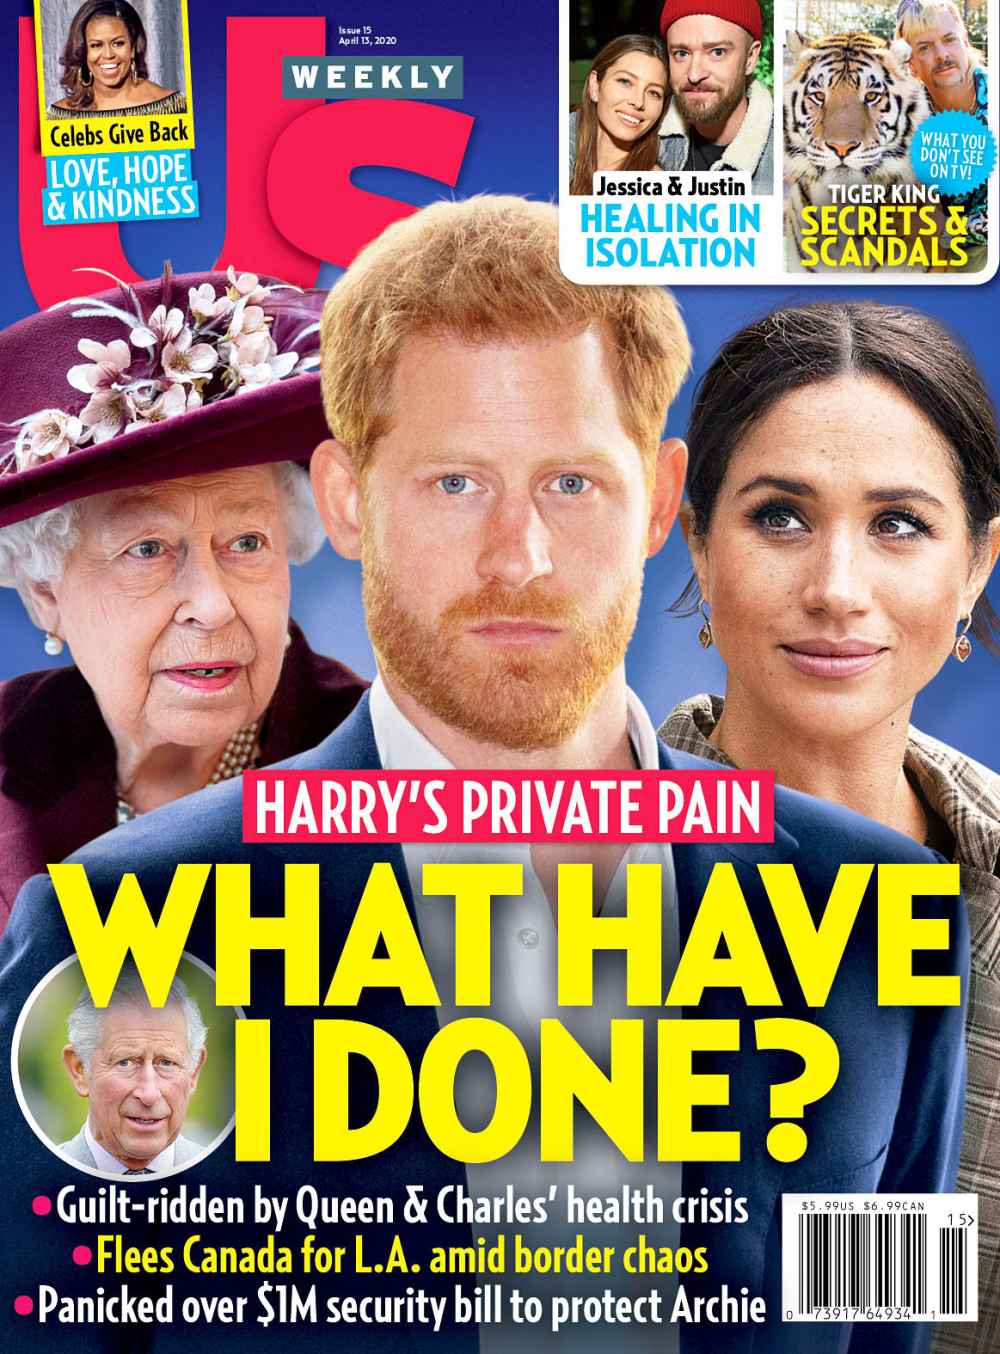 Us Weekly Cover Issue 1520 Prince Harry Meghan Markle Queen Elizabeth Ben Affleck Would Love to Have a Baby With His Girlfriend Ana De Armas